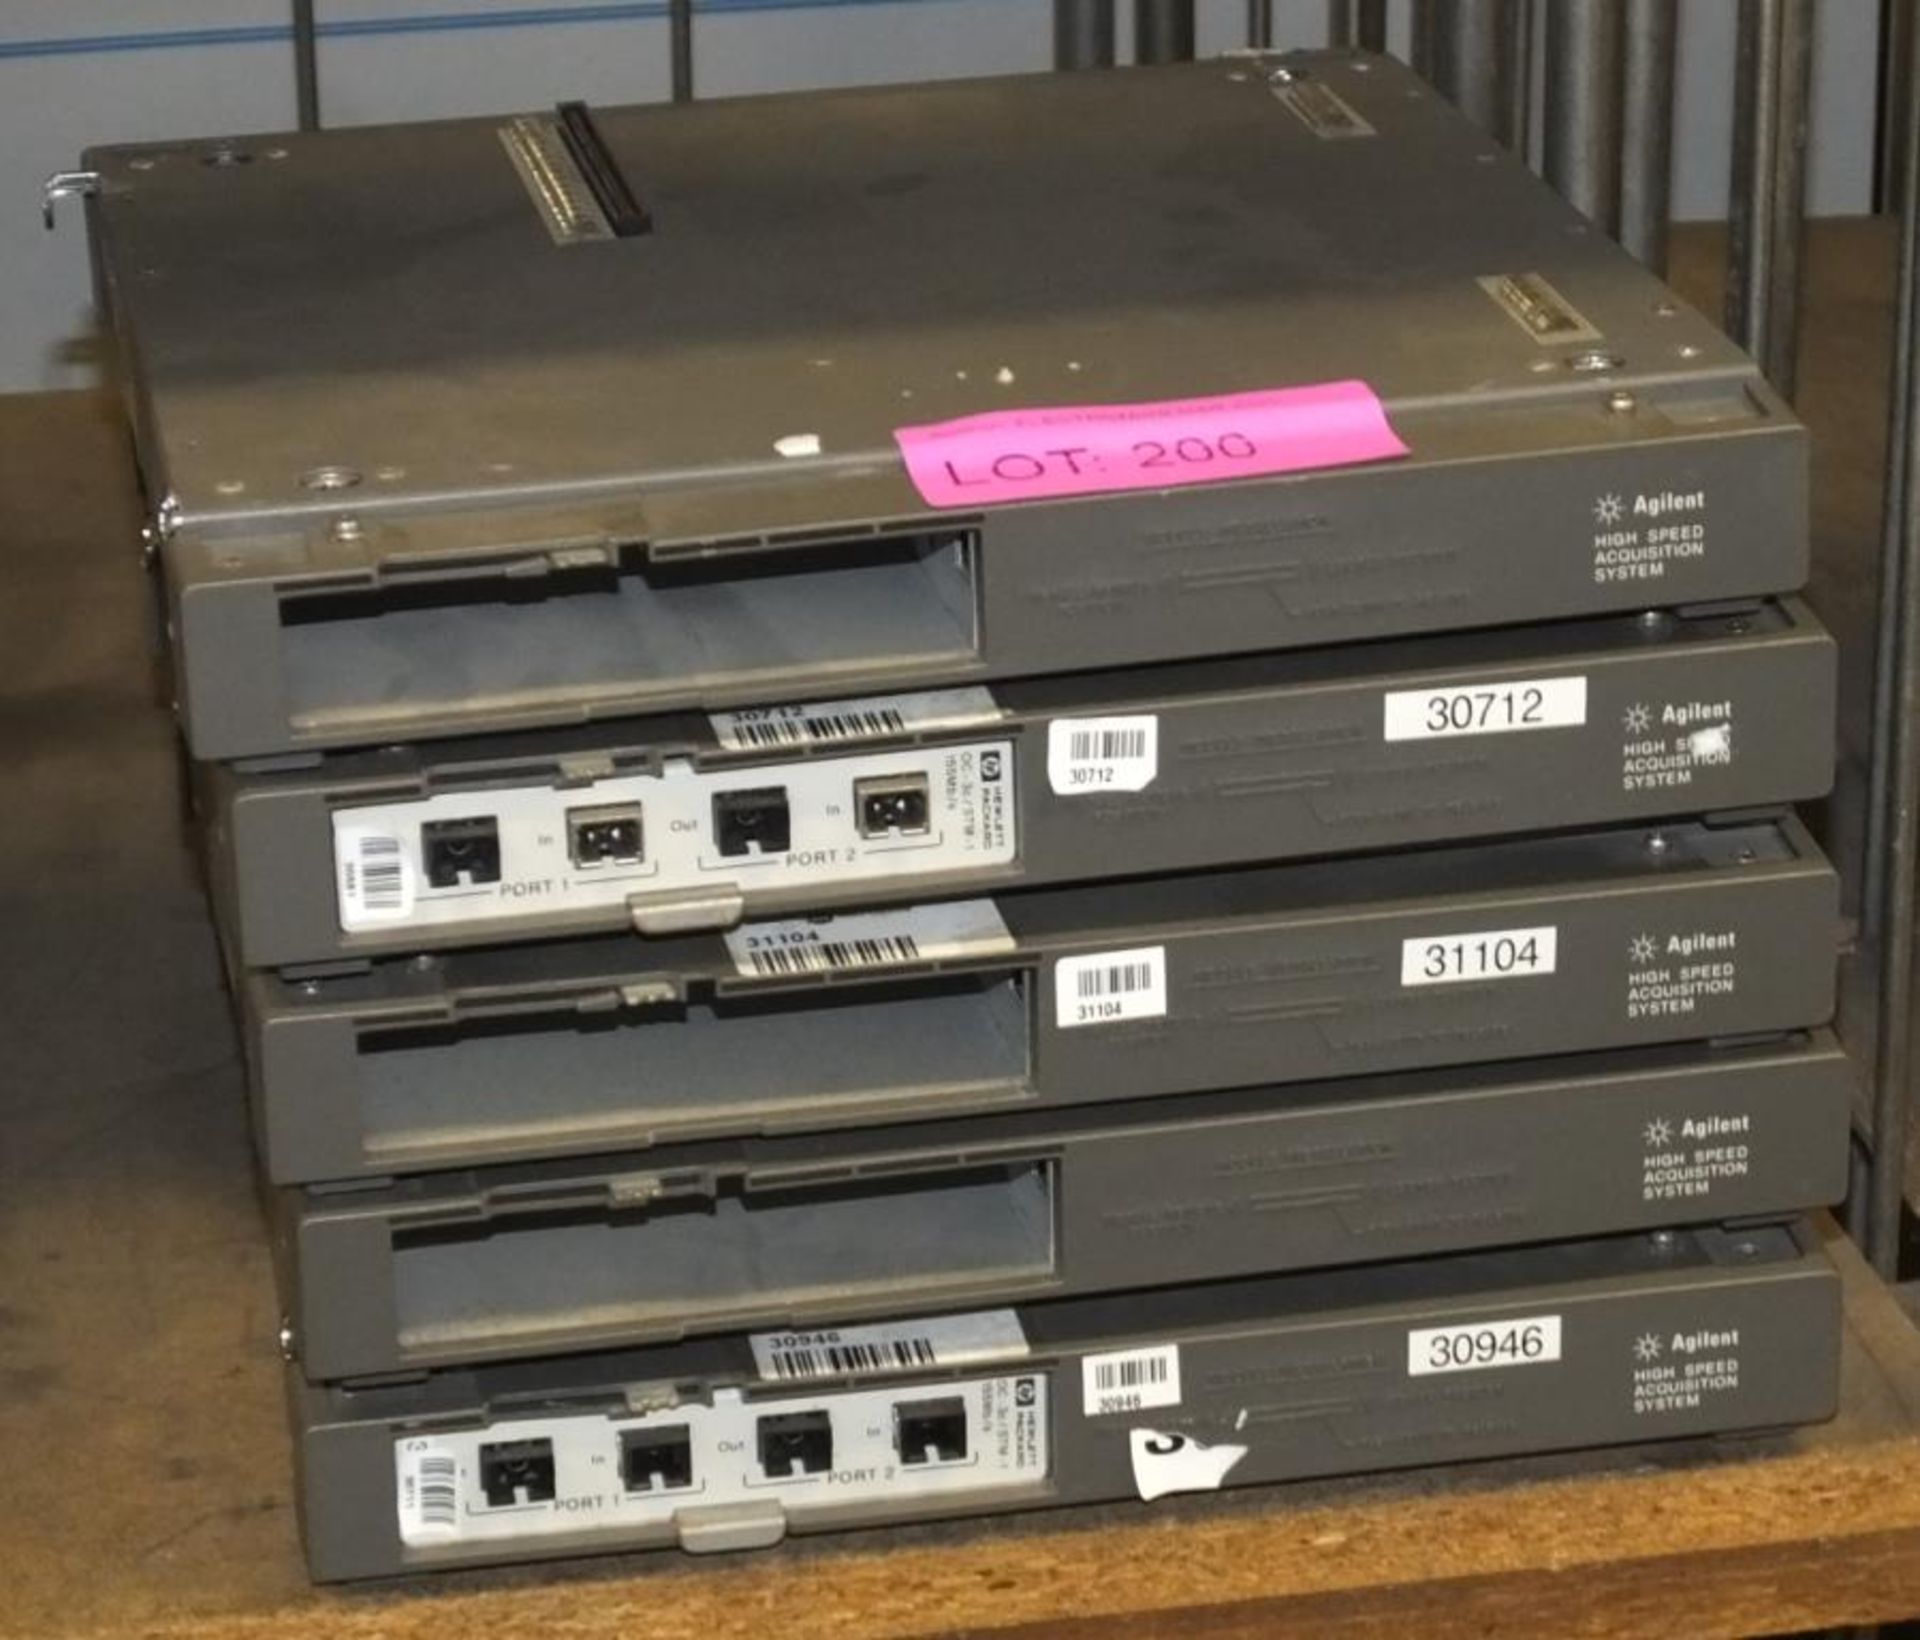 5x Agilent High Speed Acquisition System Panels